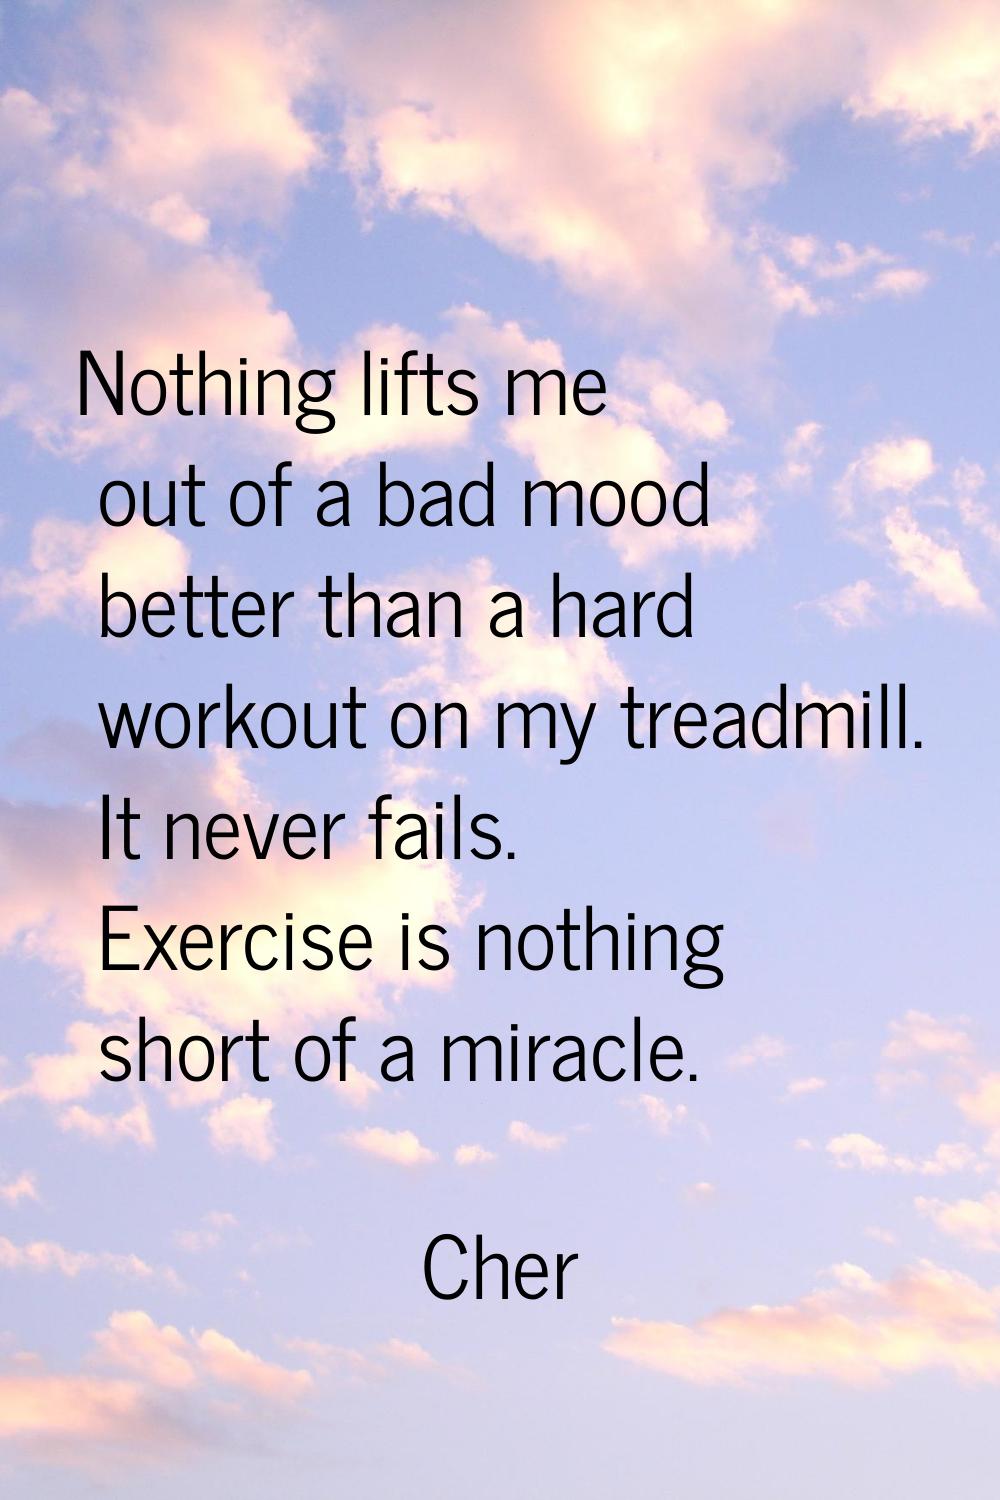 Nothing lifts me out of a bad mood better than a hard workout on my treadmill. It never fails. Exer